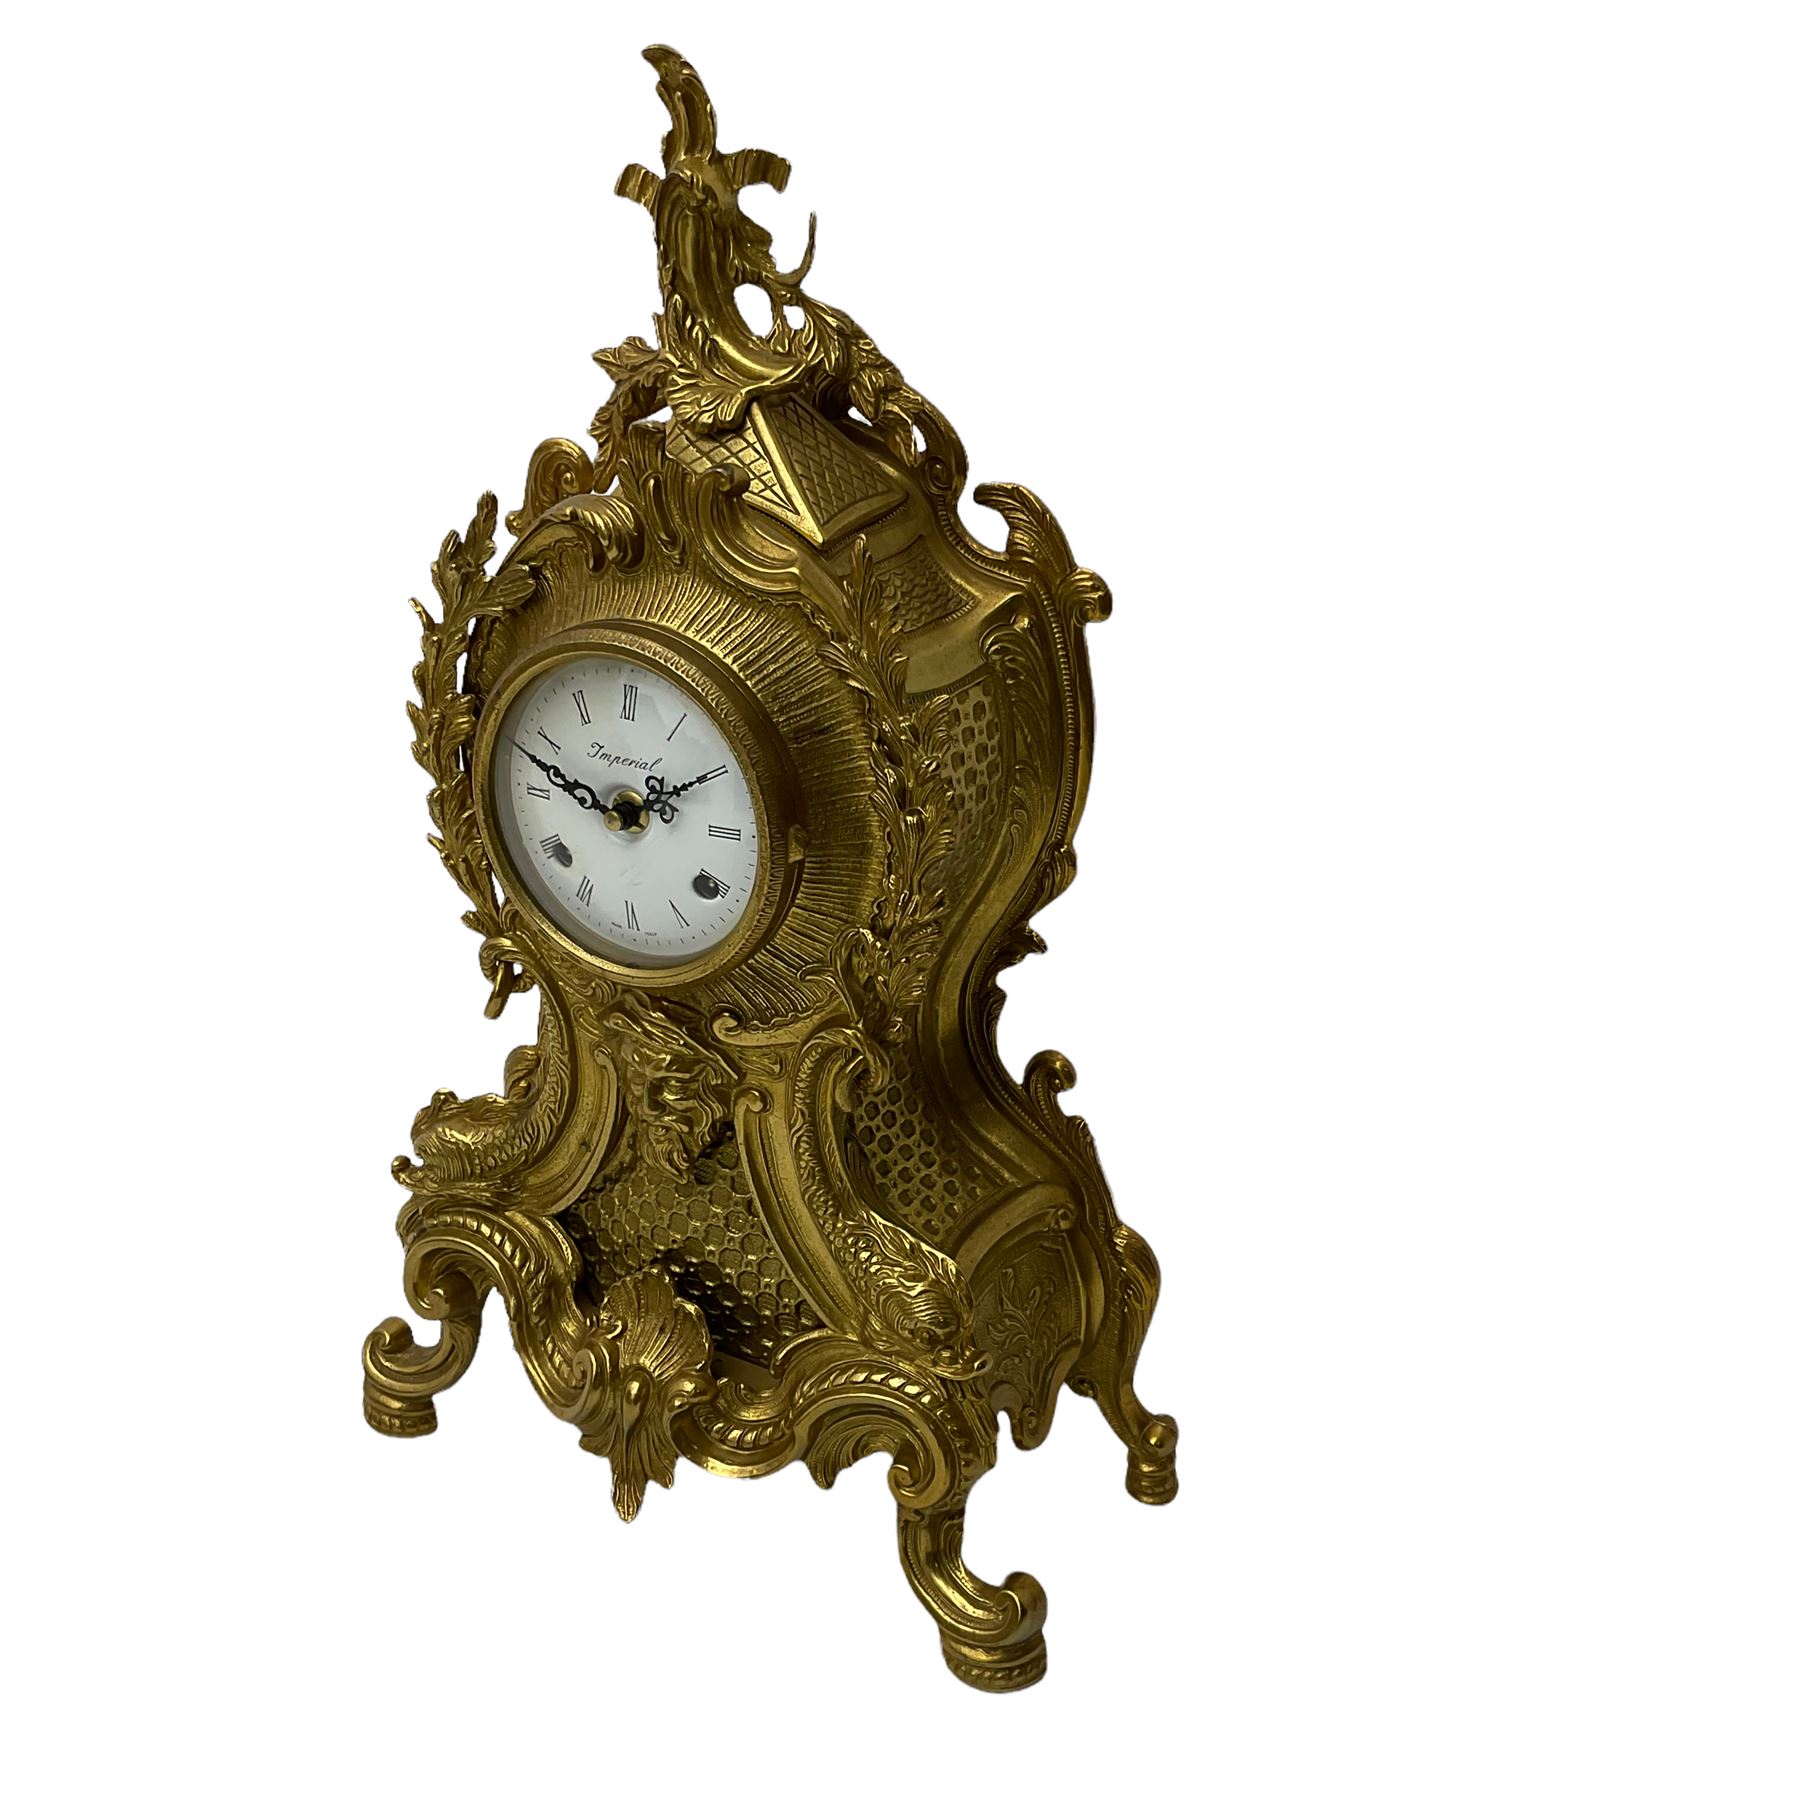 A 20th century Italian striking mantle clock in a brass case in the late 18th century Rocco style - Image 2 of 3